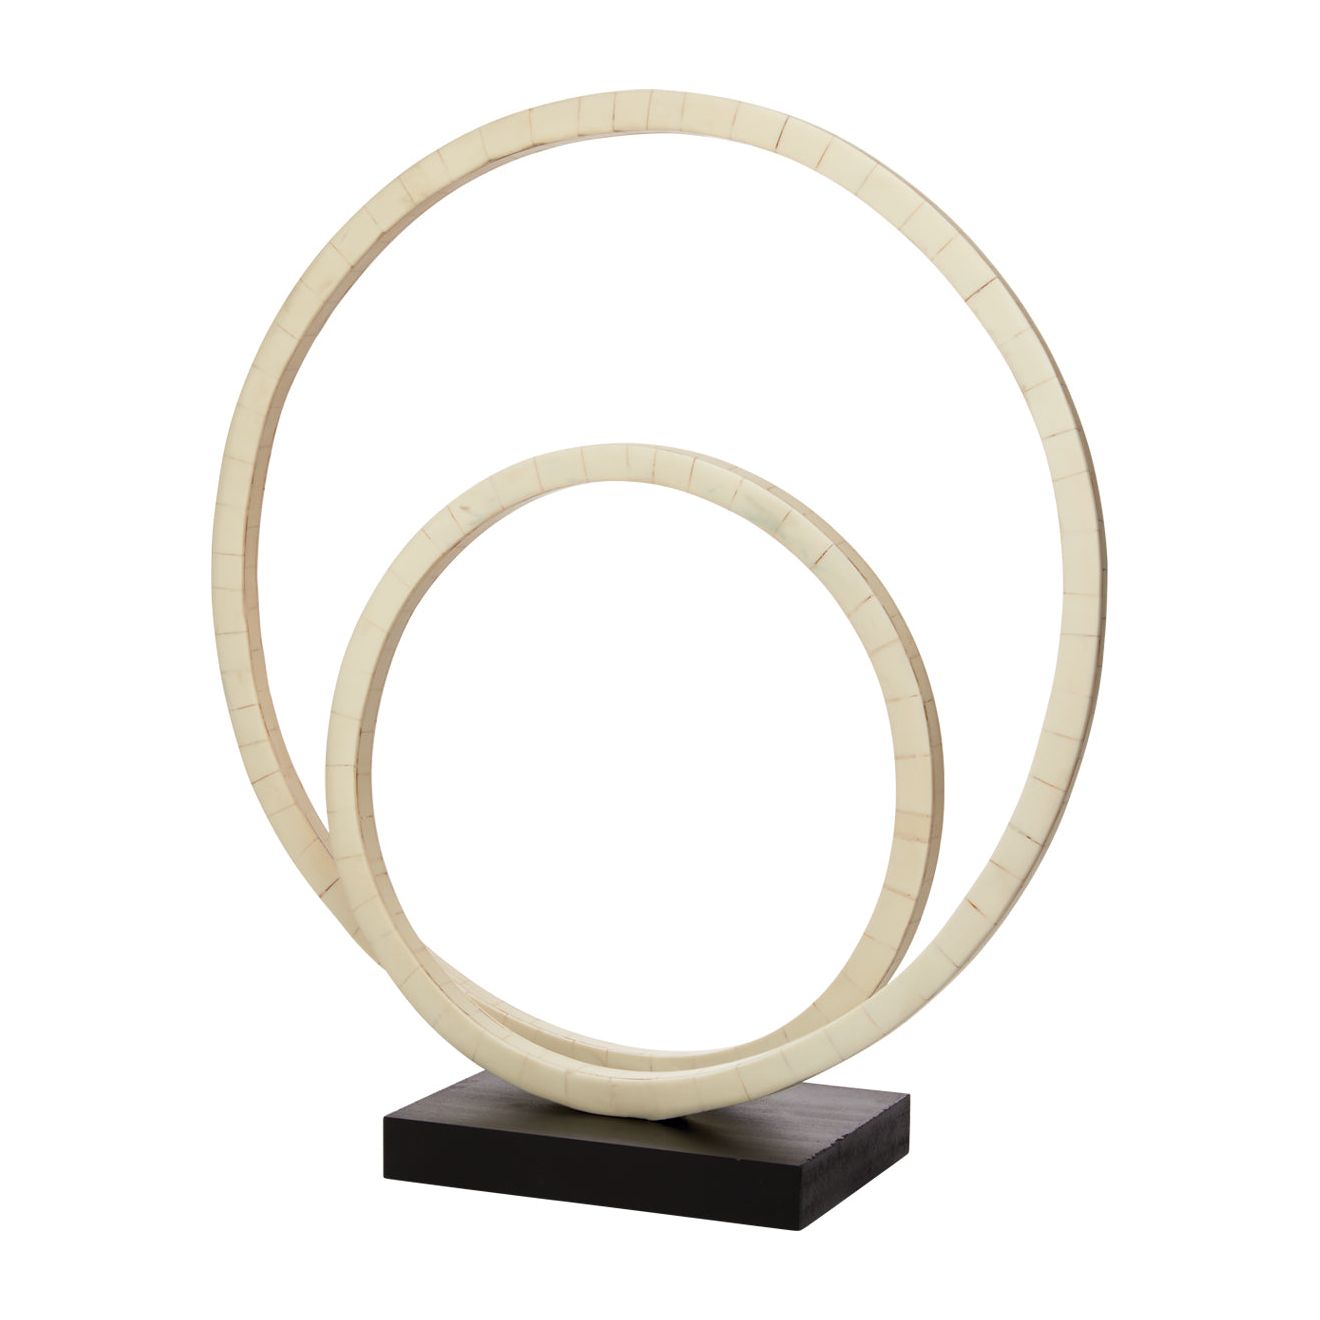 Jamie Young Company - 7HELI-NABO - Helix Double Ring Sculpture - Helix - Cream